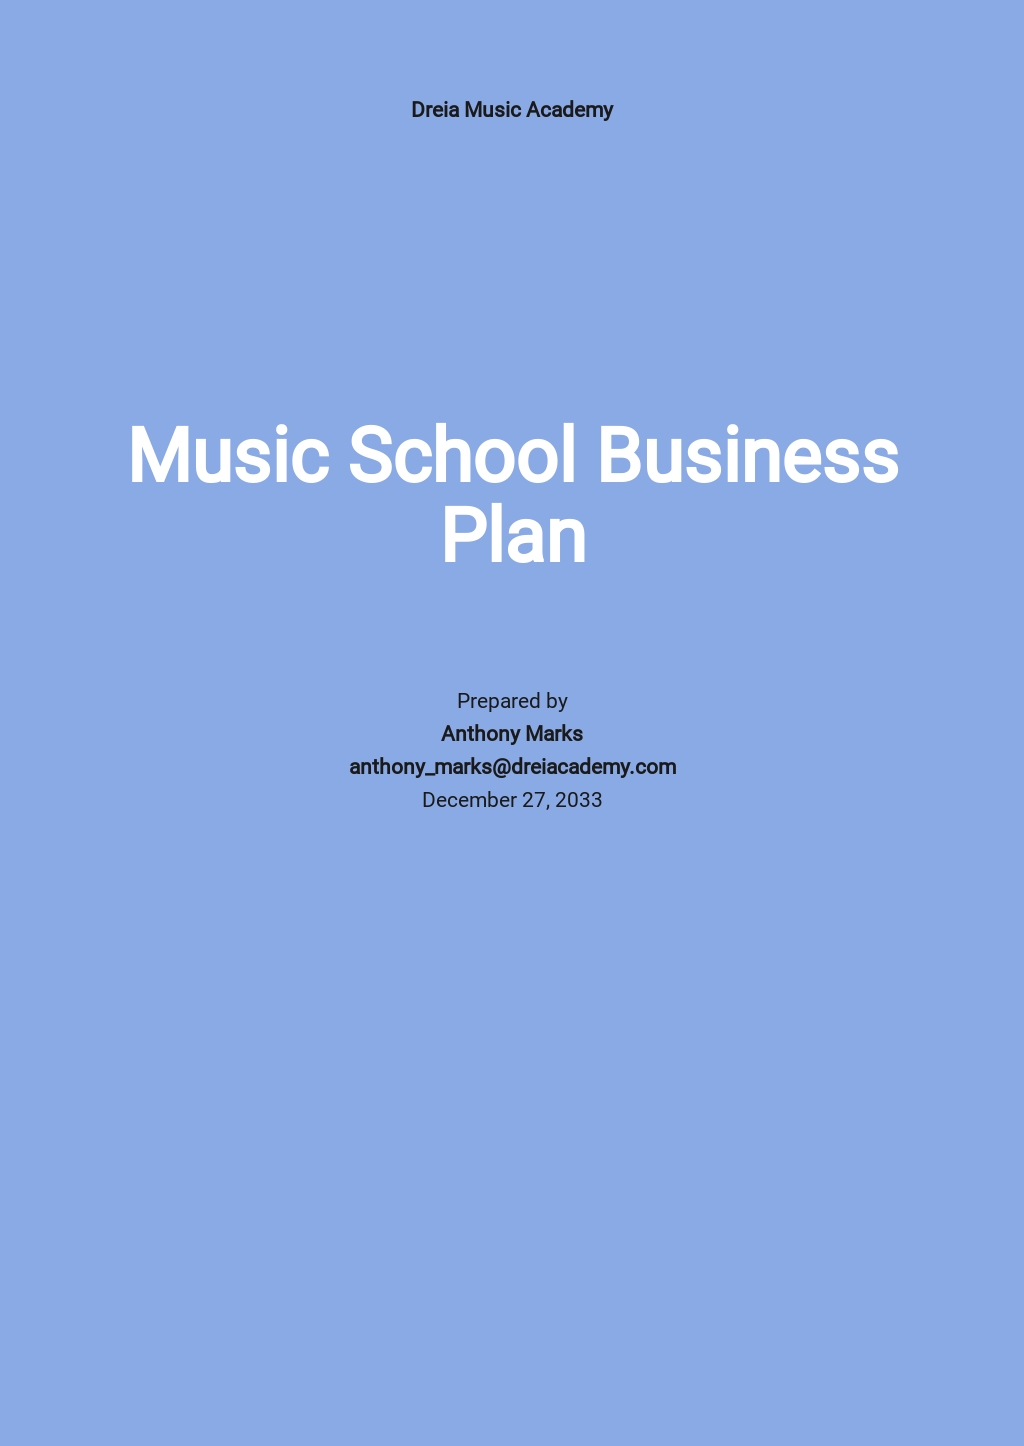 Music School Business Plan Template - Google Docs, Word, Apple Intended For Template For Writing A Music Business Plan